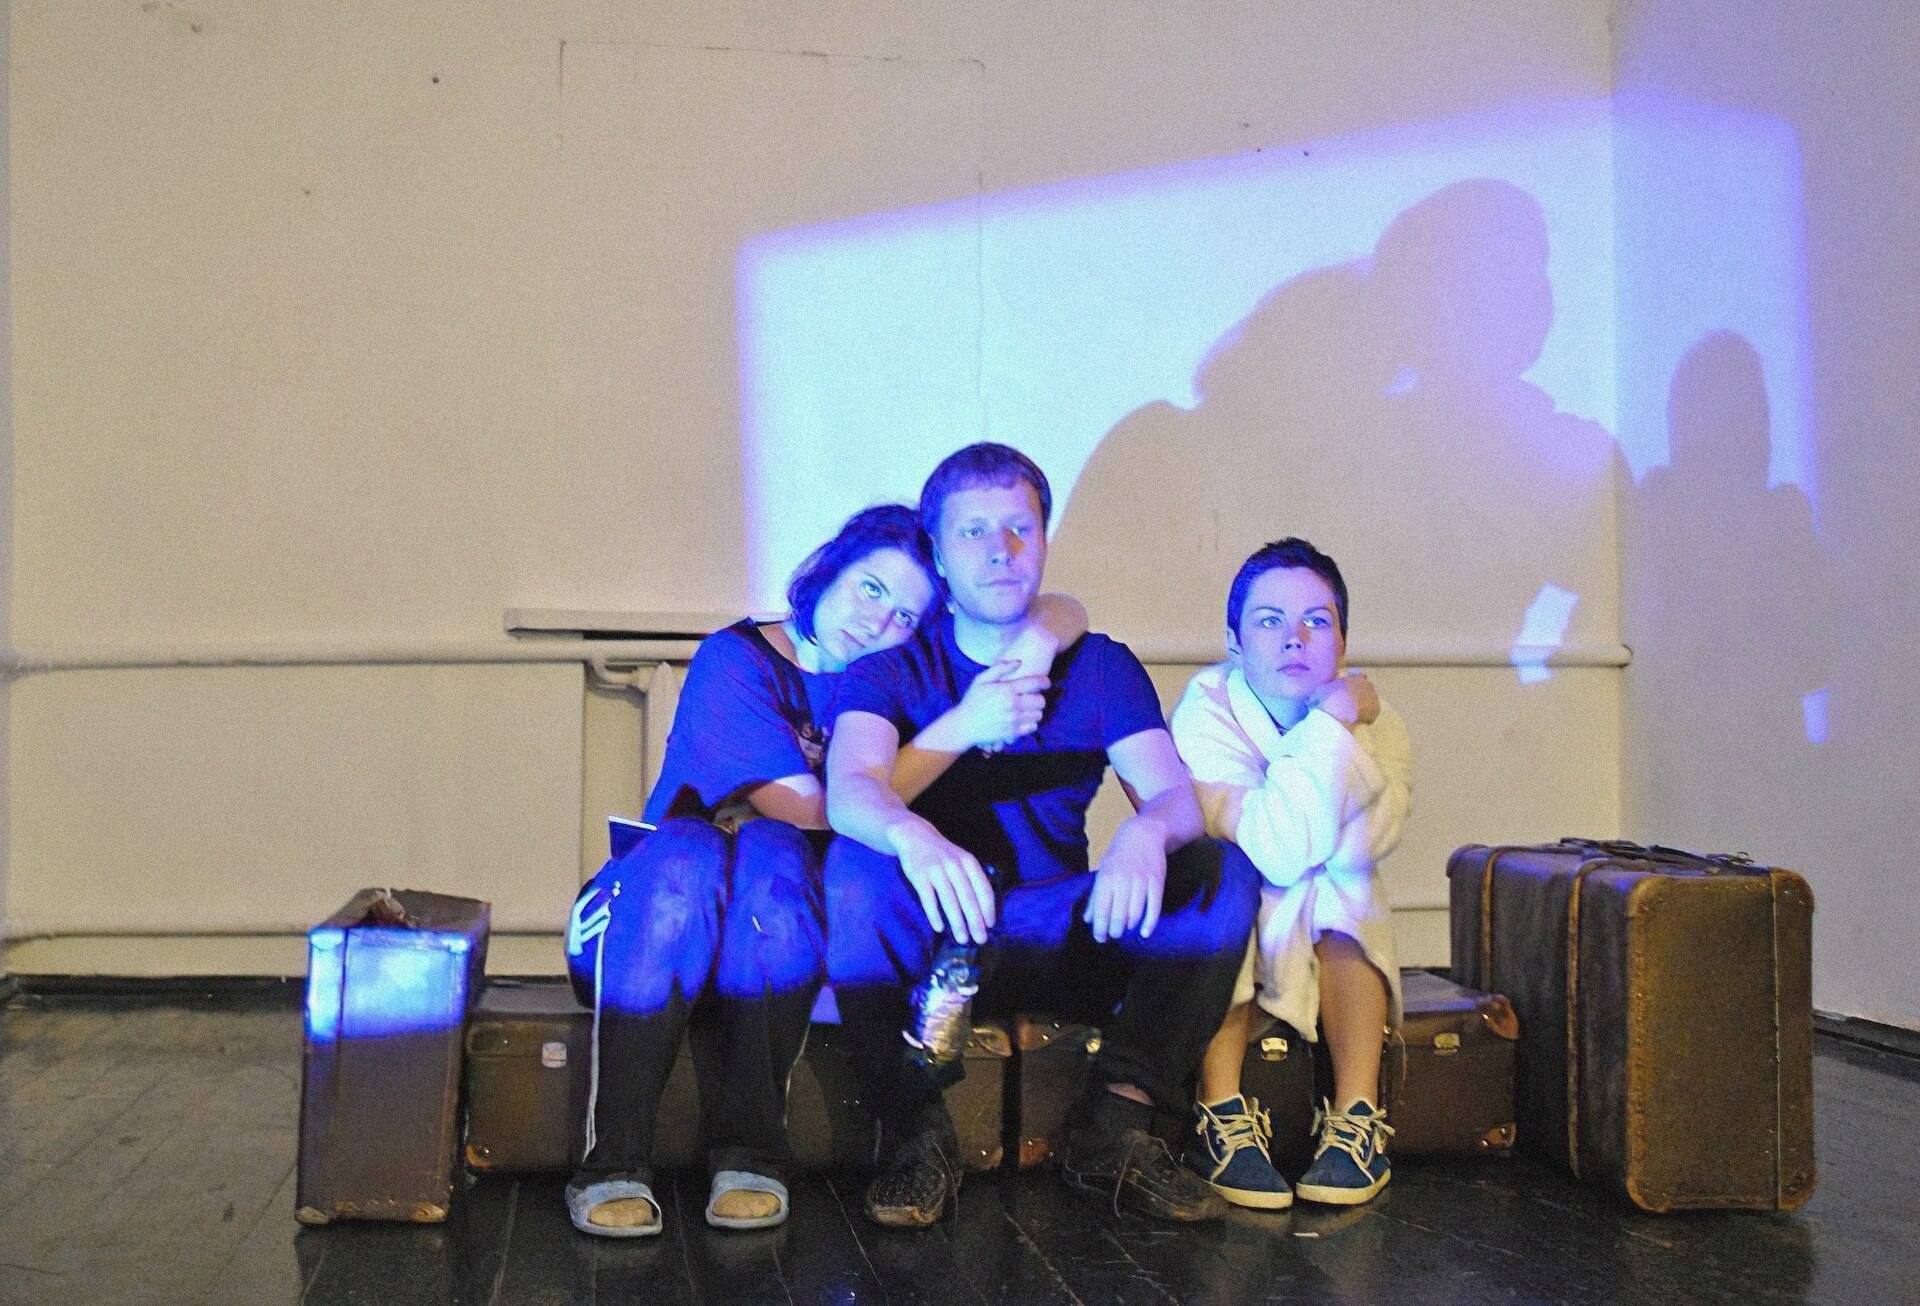 A line of luggage is sitting in an otherwise empty room. Dim blue light is shining on the wall like it's coming from a window. Three people are sitting on the luggage, on on the left wrapping their arms around the one in the middle. All three of them are looking at something in front, unamused